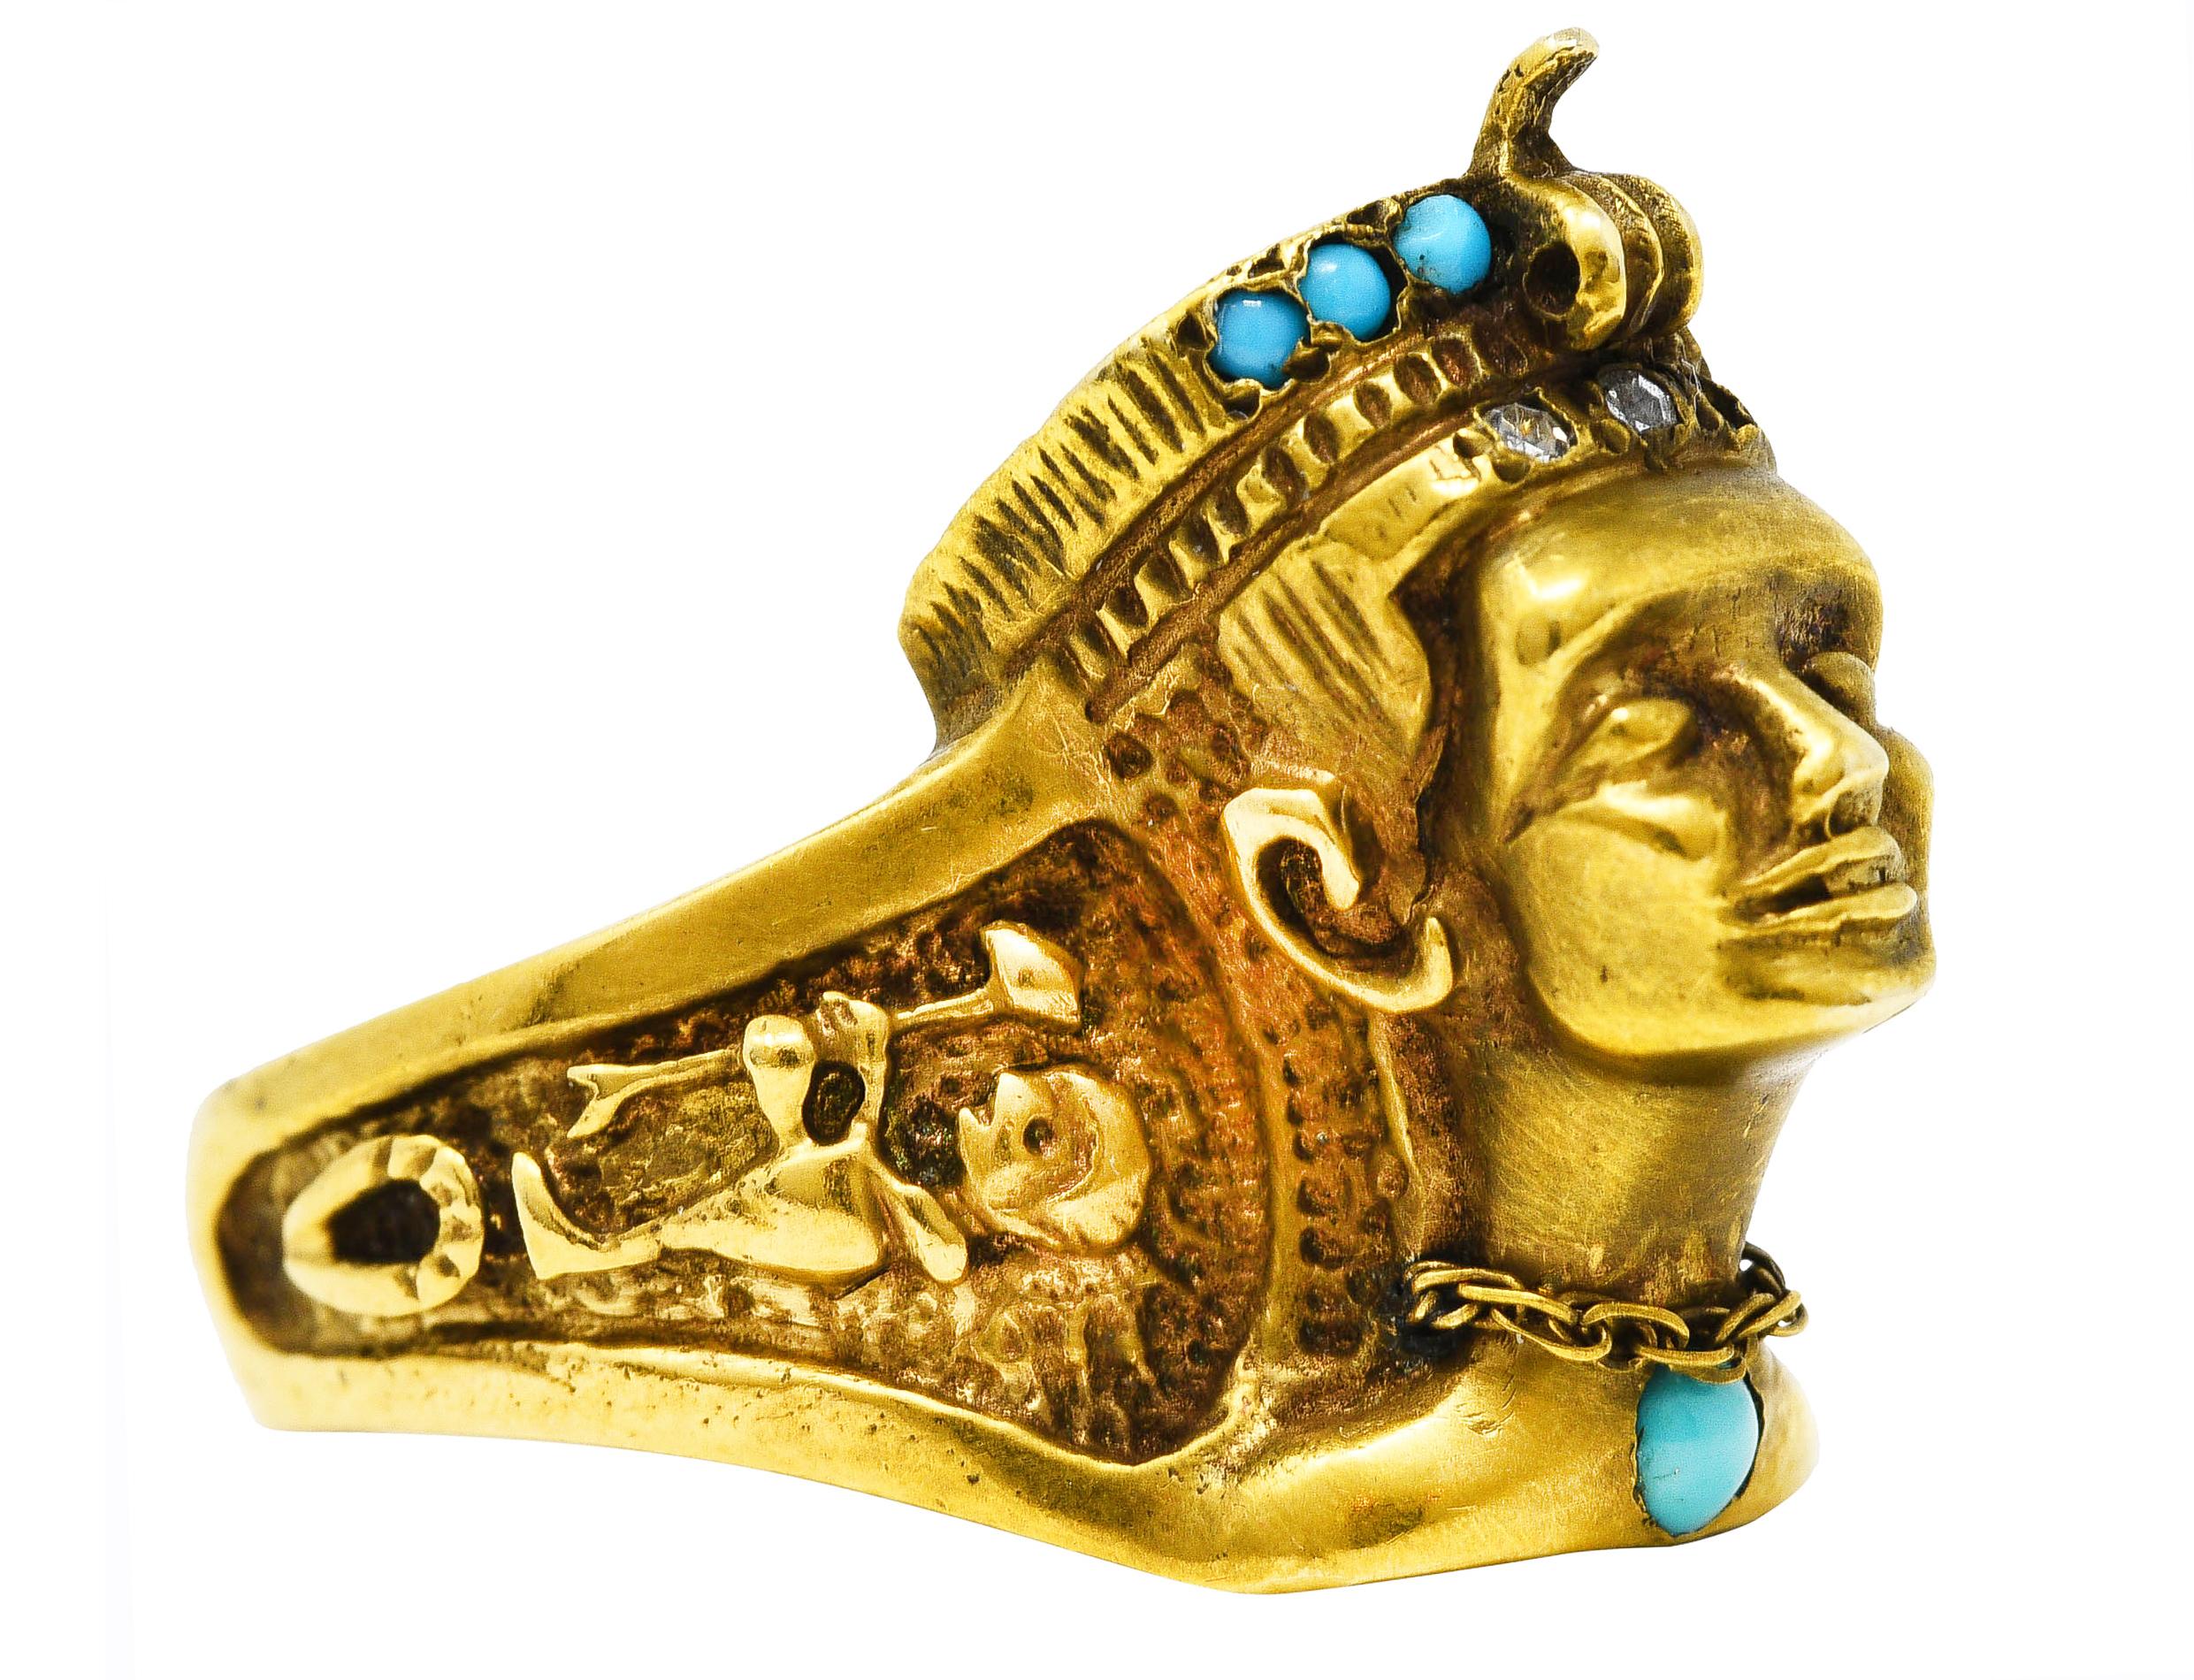 Ring is designed as a highly rendered bust of the Egyptian queen Nefertiti with a decorative headdress. Featuring flush set turquoise cabochons in headdress and on chest - ranging in size from 1.0 to 2.5 mm. Opaque and ranging in color from robin's